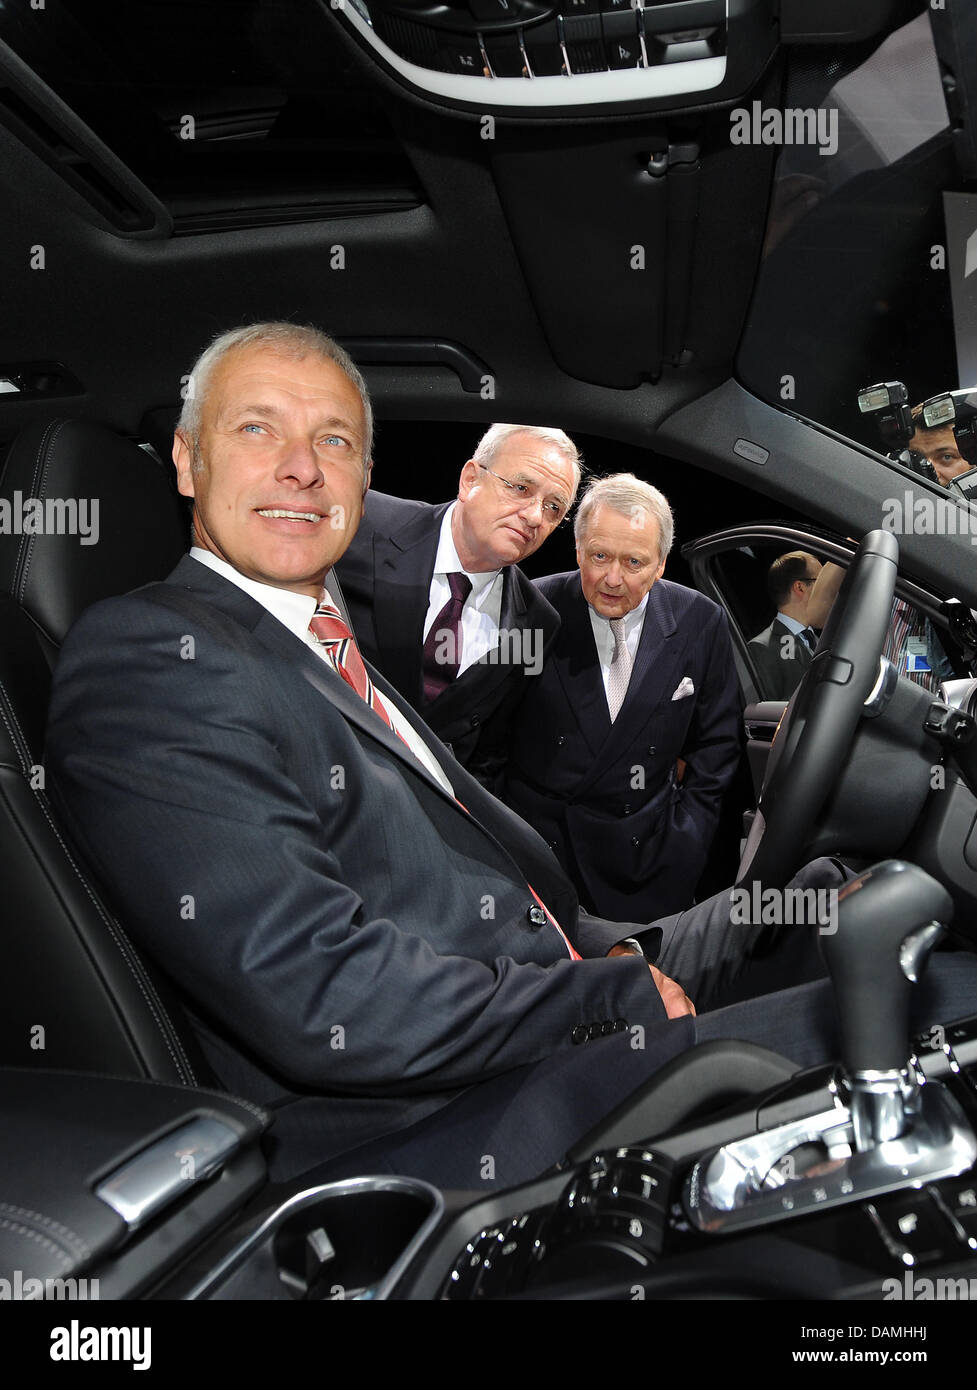 Chairman of the board of Porsche AG, Matthias Mueller (L-R), chairman of the board of Porsche Automobil Holding SE, Martin Winterkorn, and Wolfgang Porsche, supervisory board of Porsche SE, view a Porsche Cayenne at the exhibition of the general meeting of Porsche SE at the Porsche Arena in Stuttgart, Germany, 17 June 2011. Despite several unsolved problems Porsche and Volkswagen d Stock Photo